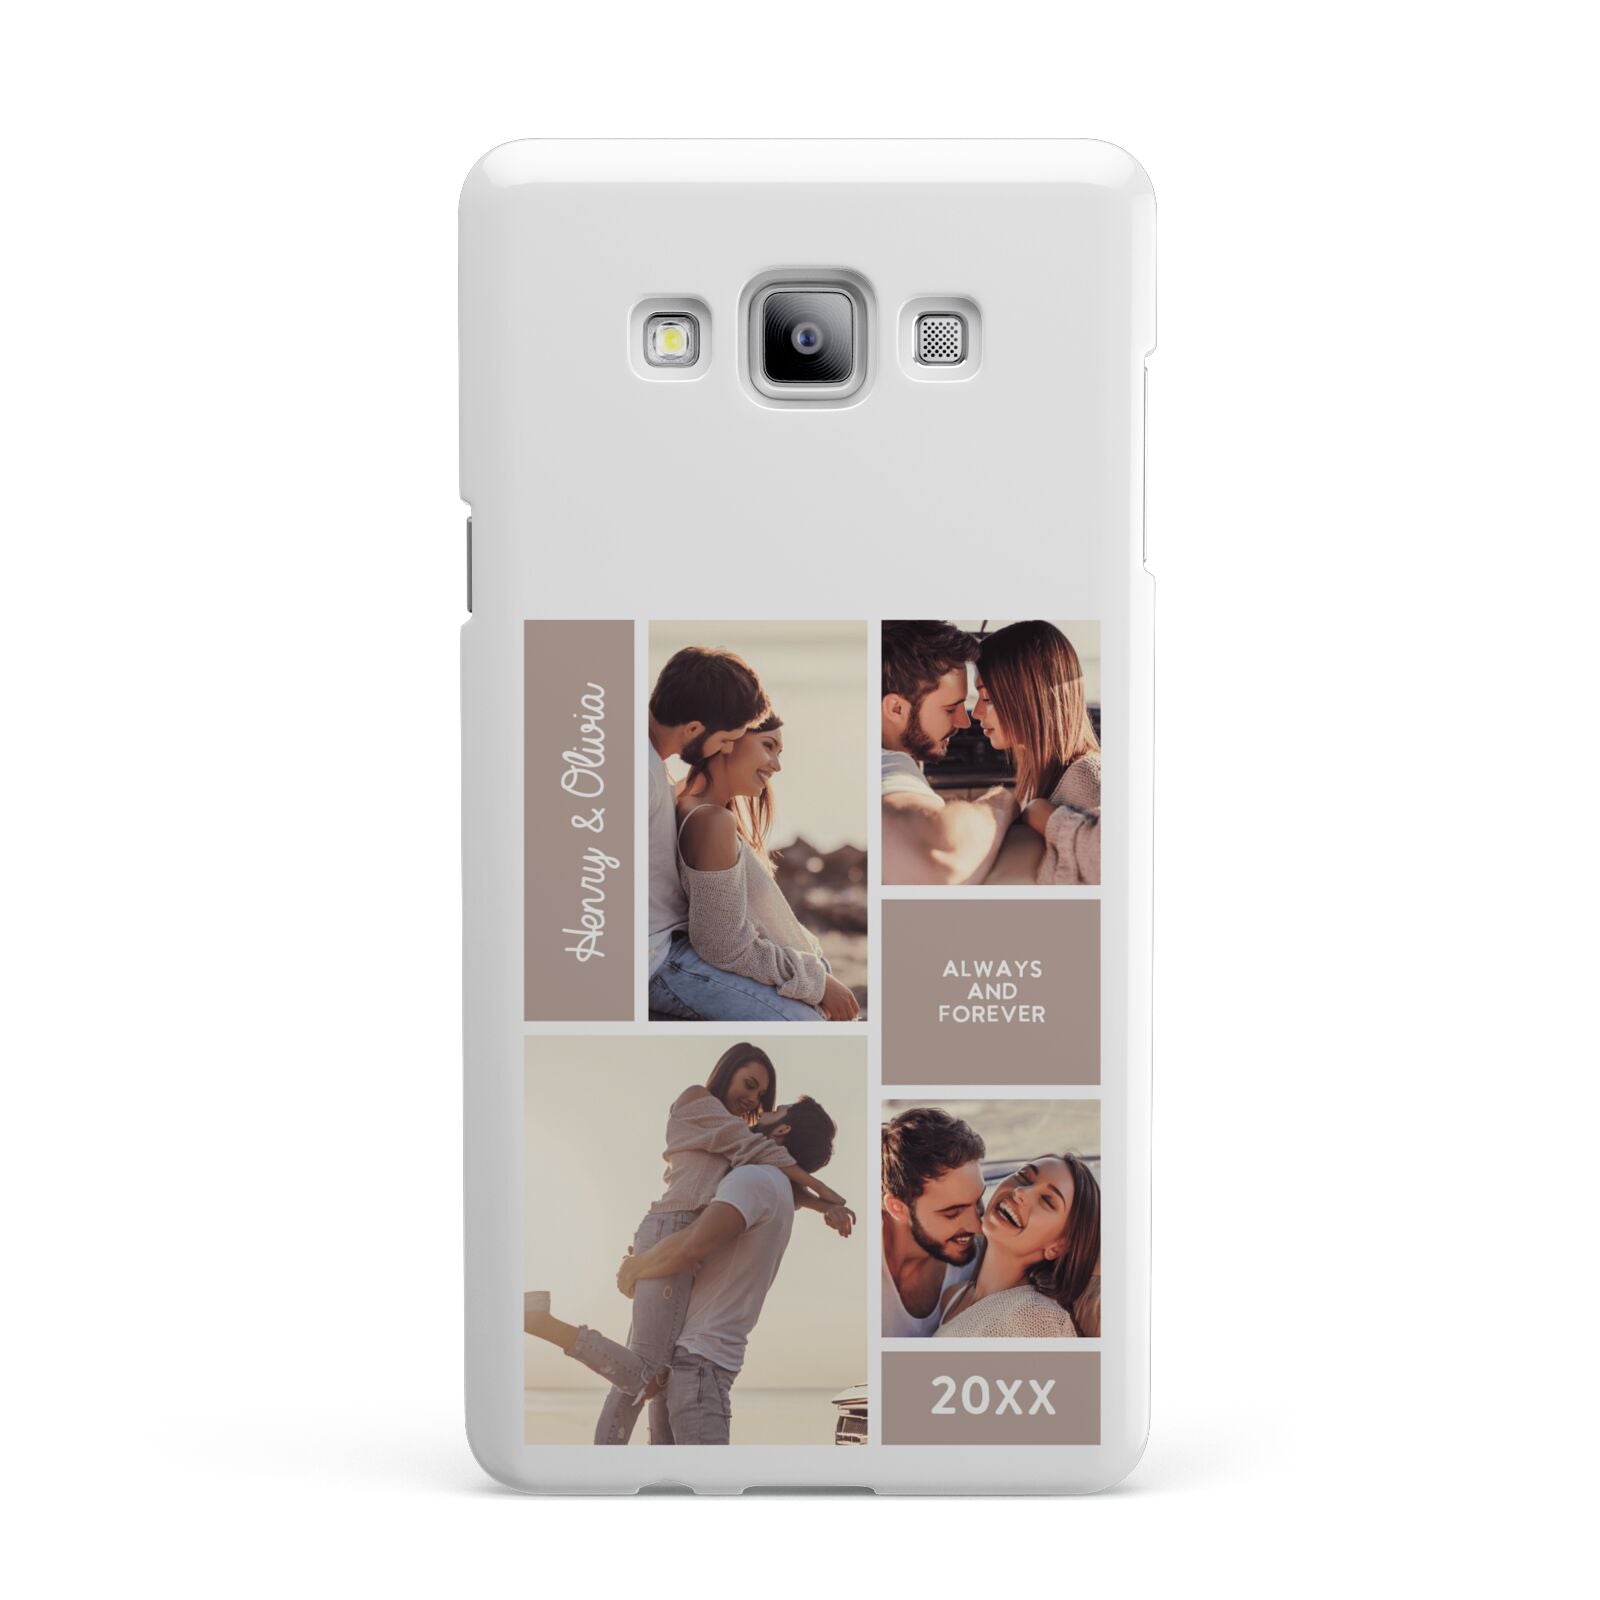 Couples Valentine Photo Collage Personalised Samsung Galaxy A7 2015 Case